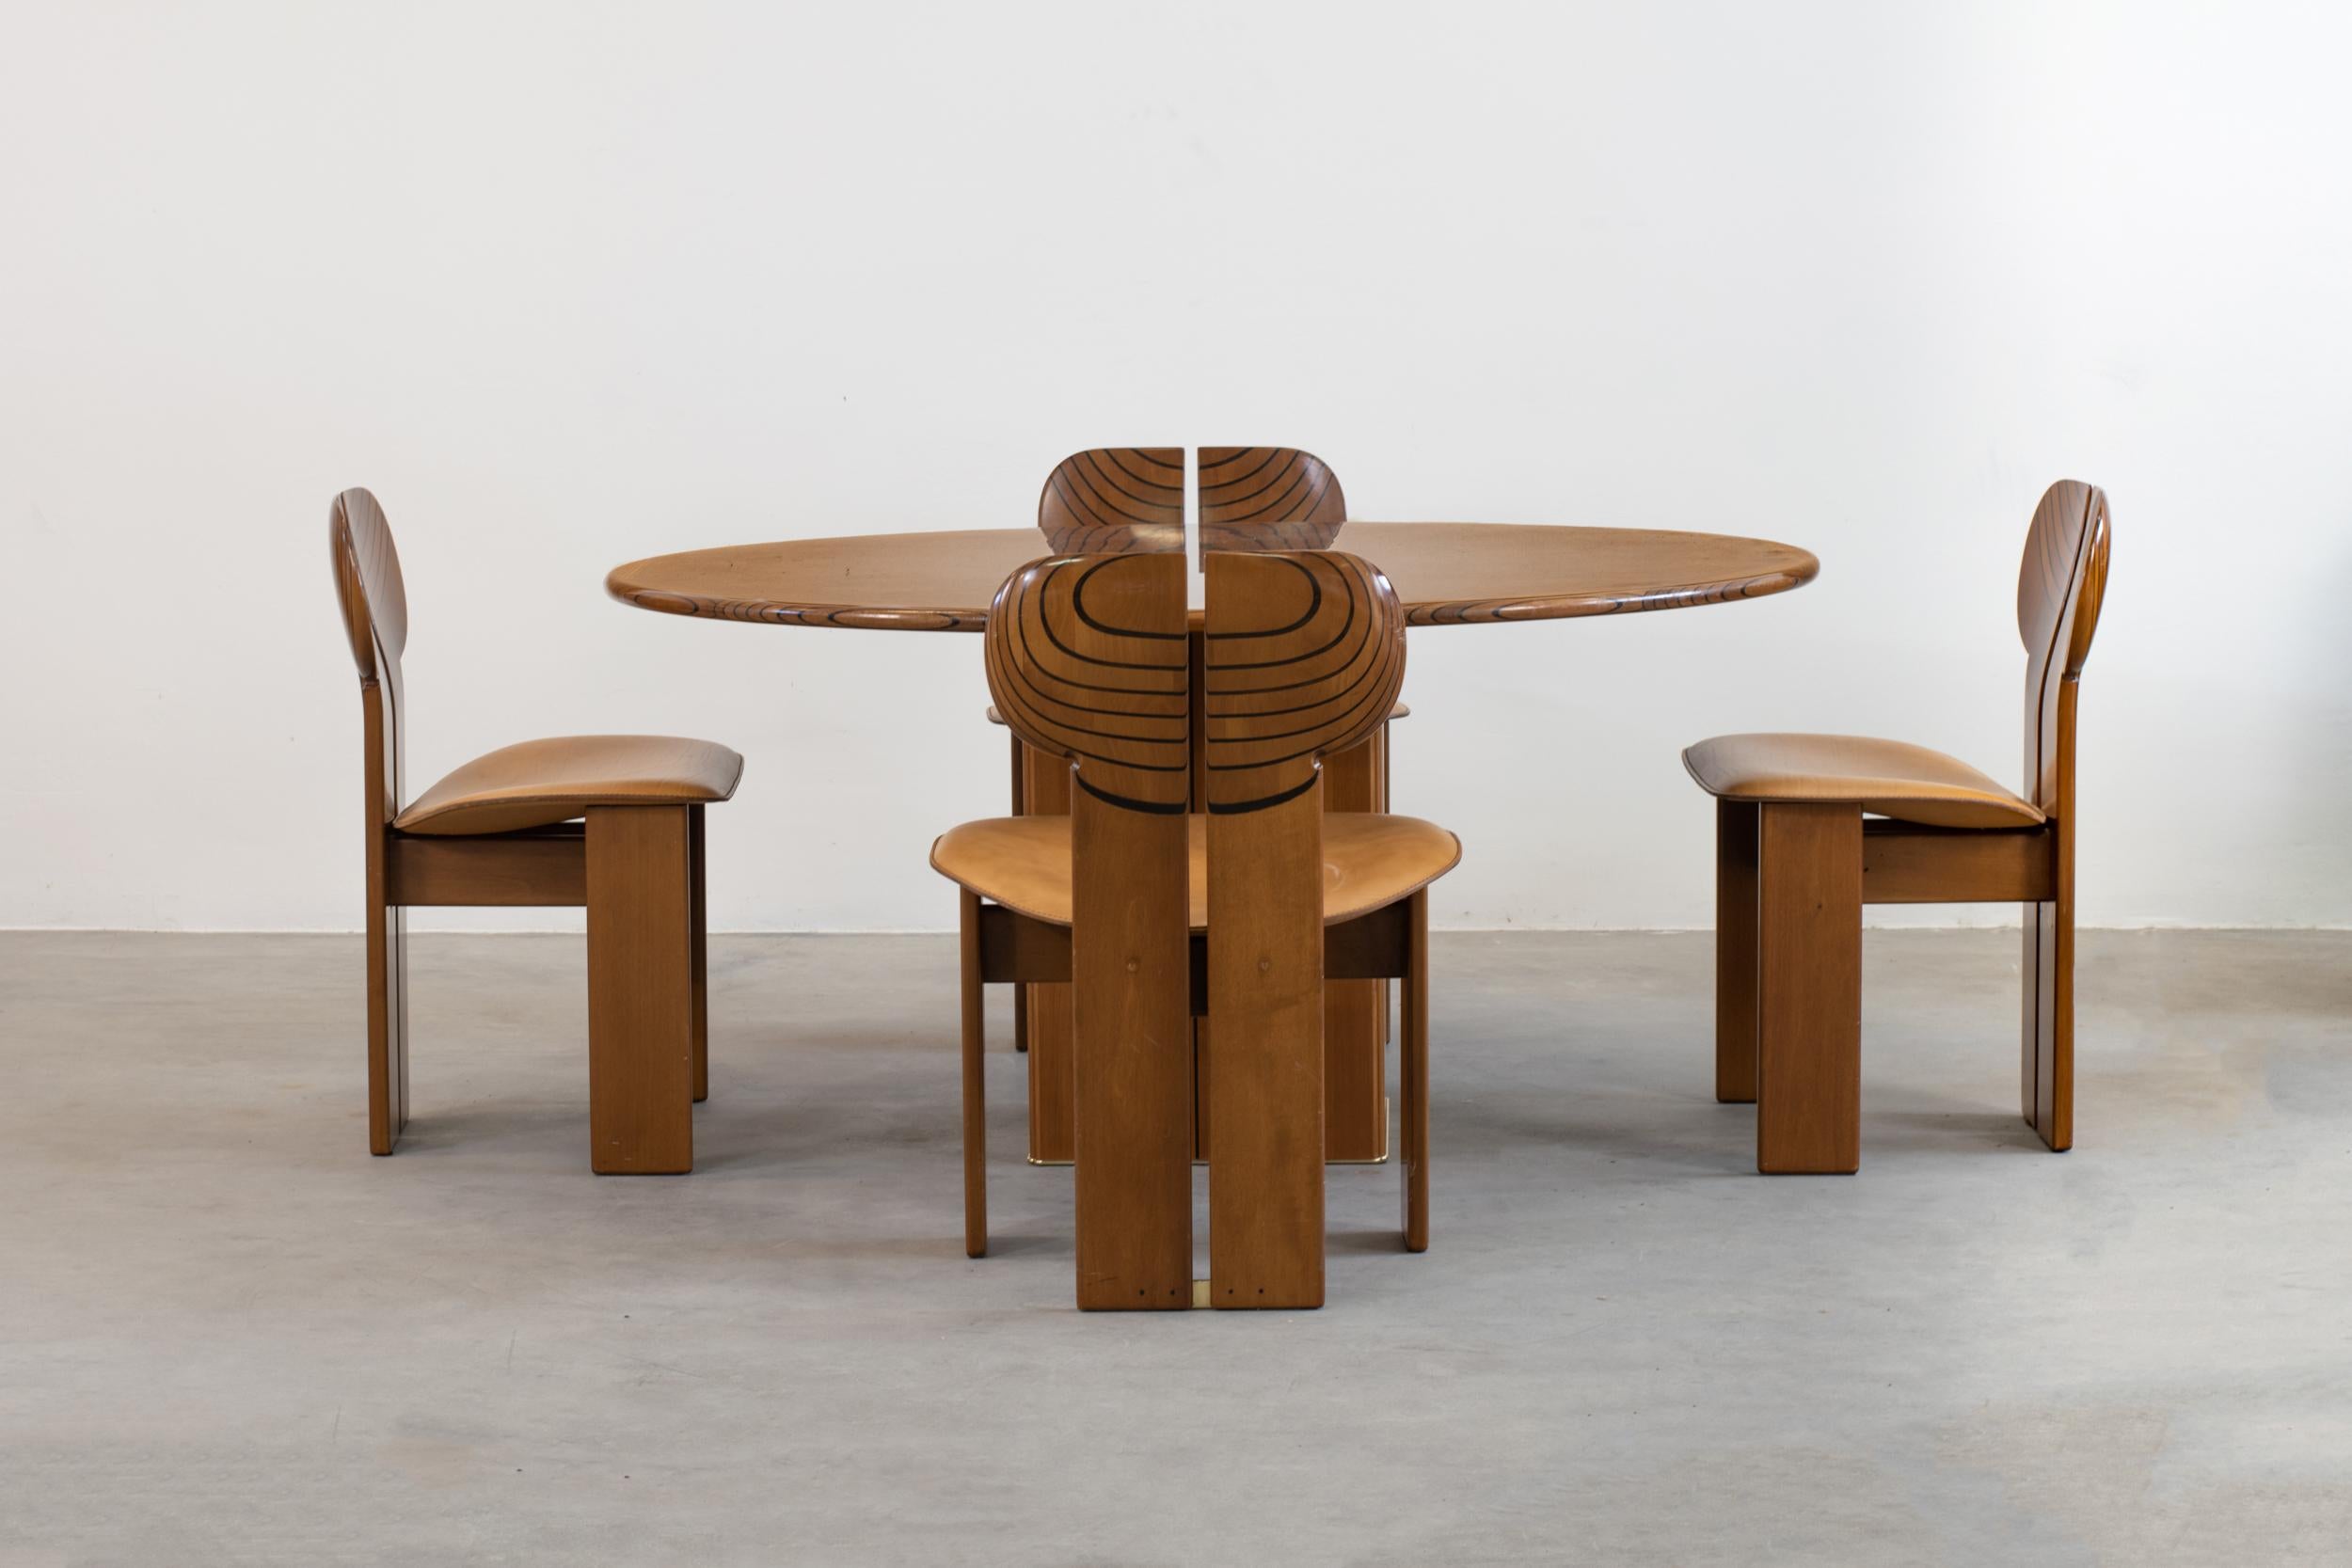 Beautiful dining room set composed of four chairs and a round table, model Africa from Artona collections by Maxalto.
Original design by Afra and Tobia Scarpa in the 1970s.
Dimensions: H 78.5 x 56 x 46 cm (each chairs), H 70 x 145 cm (table).